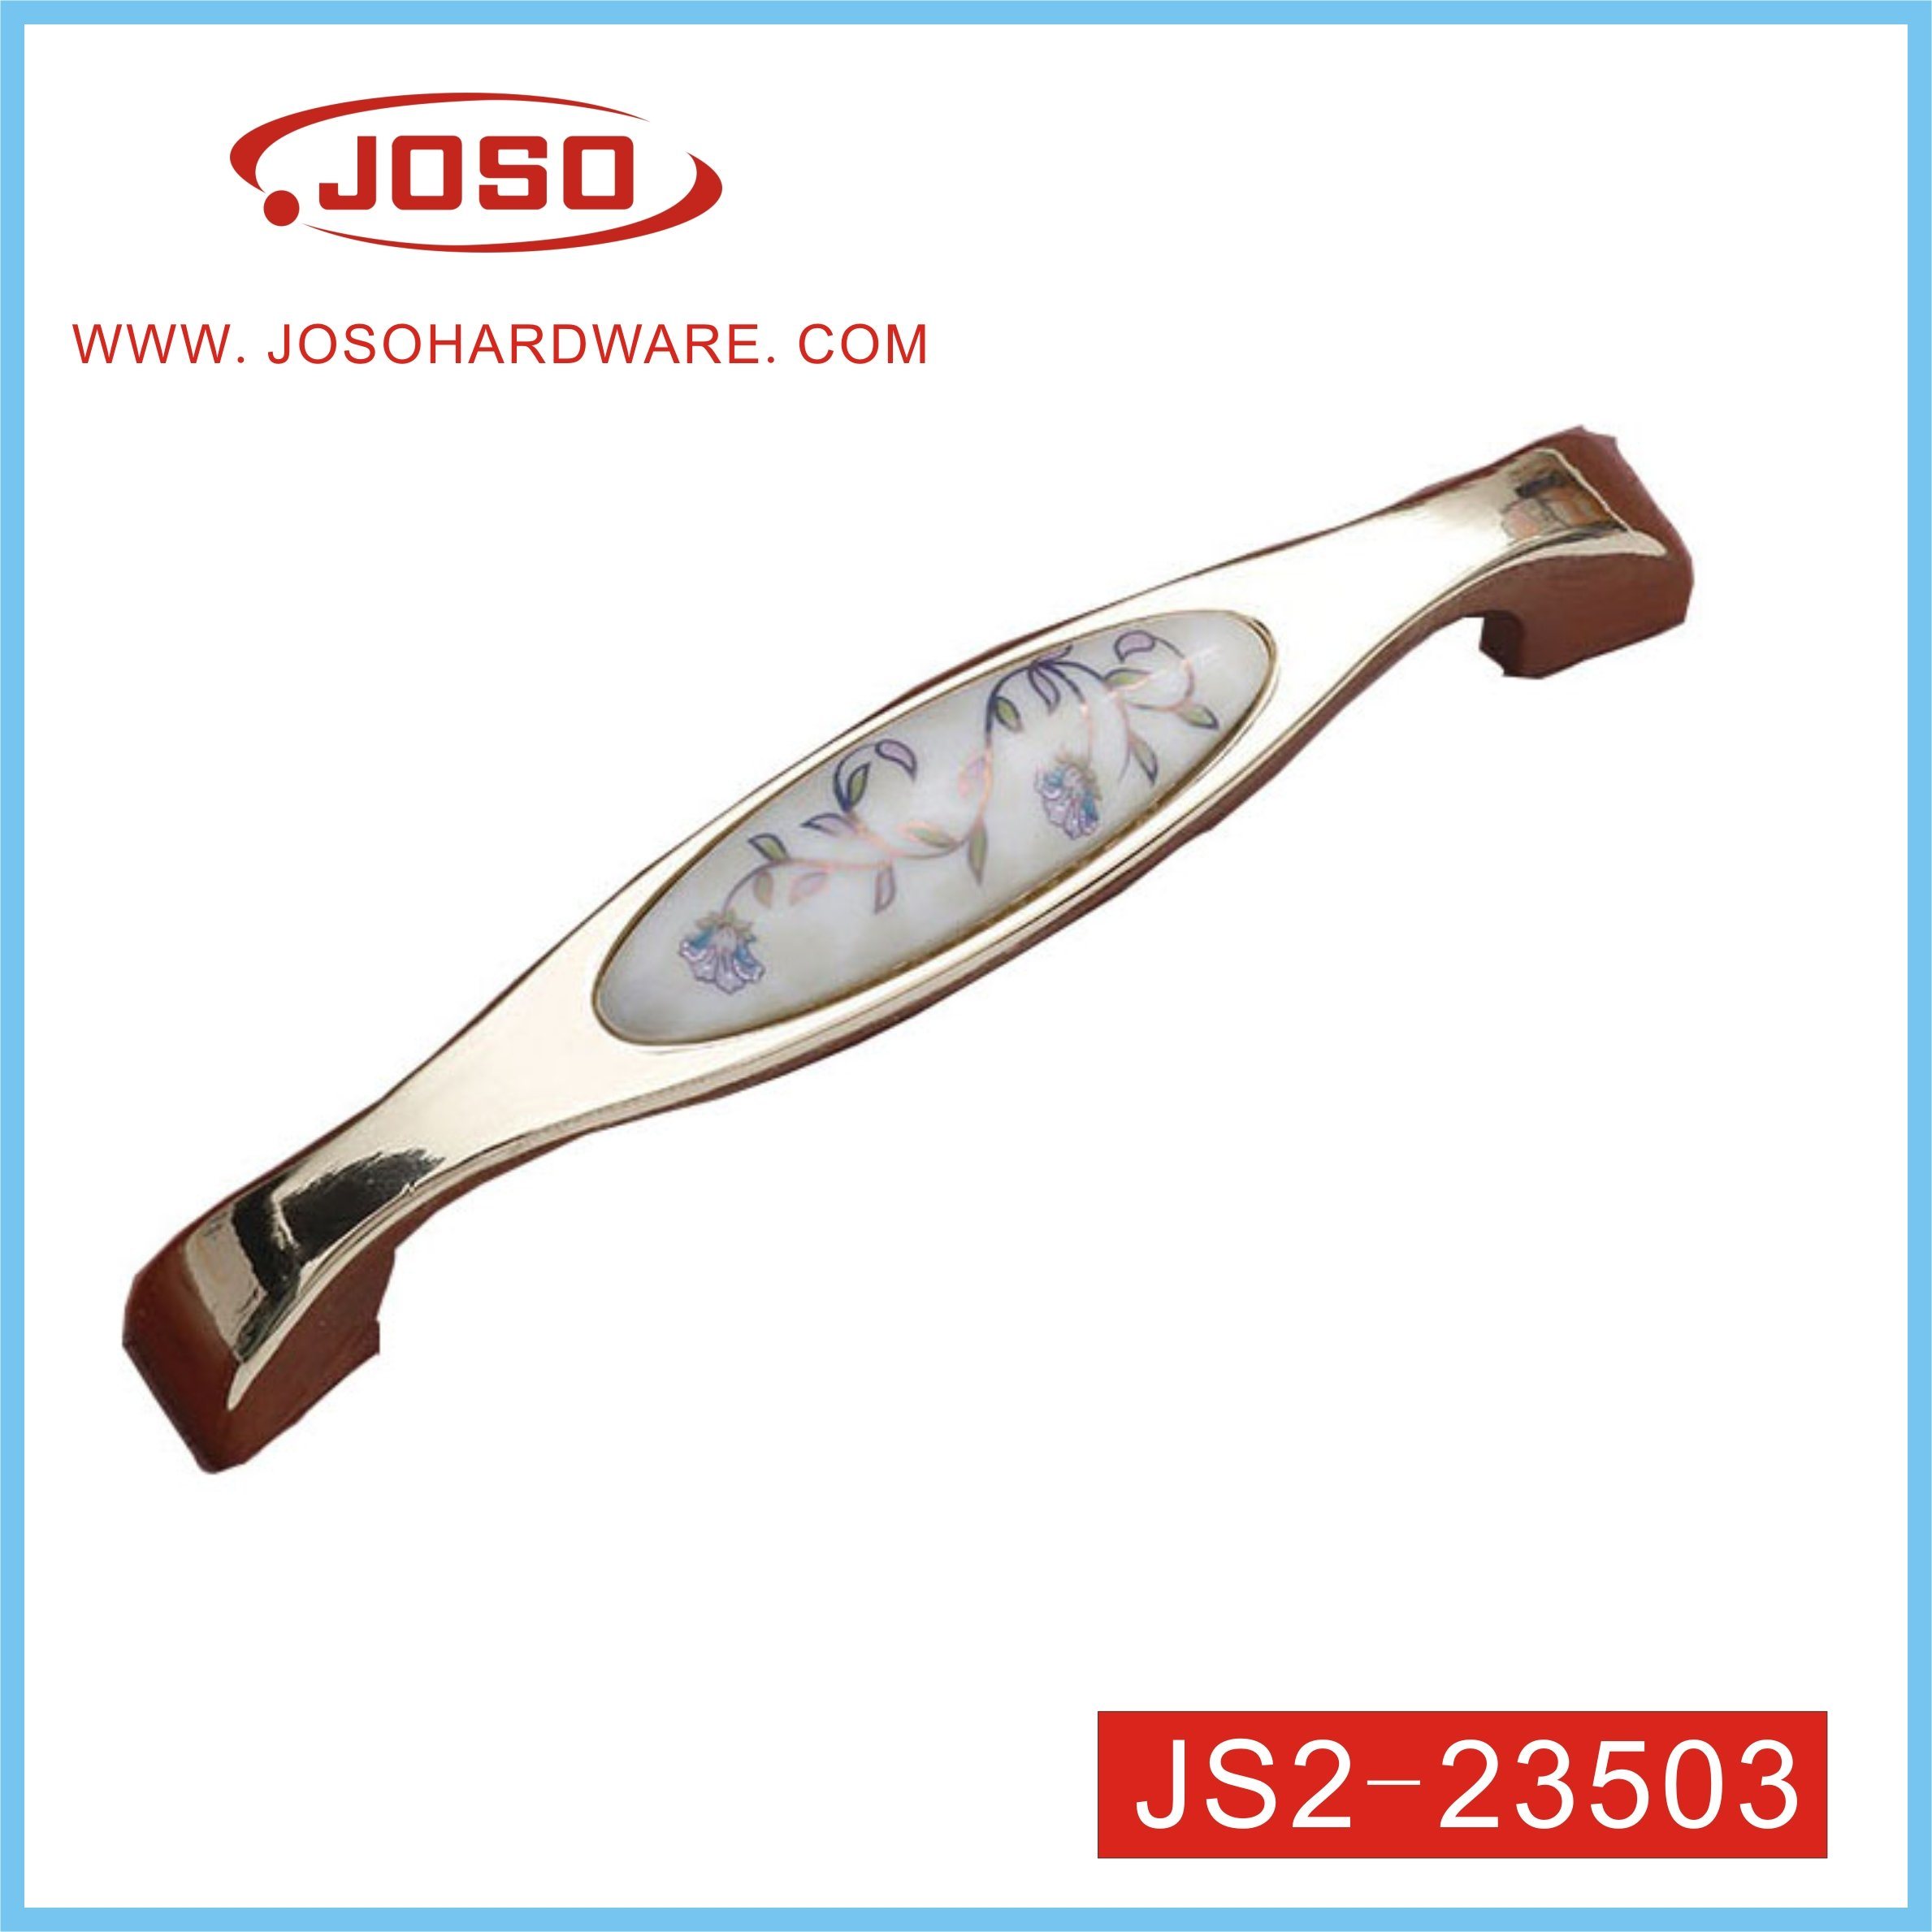 Classical Gold Zinc Alloy with Ceramics Handle for Wardrobe